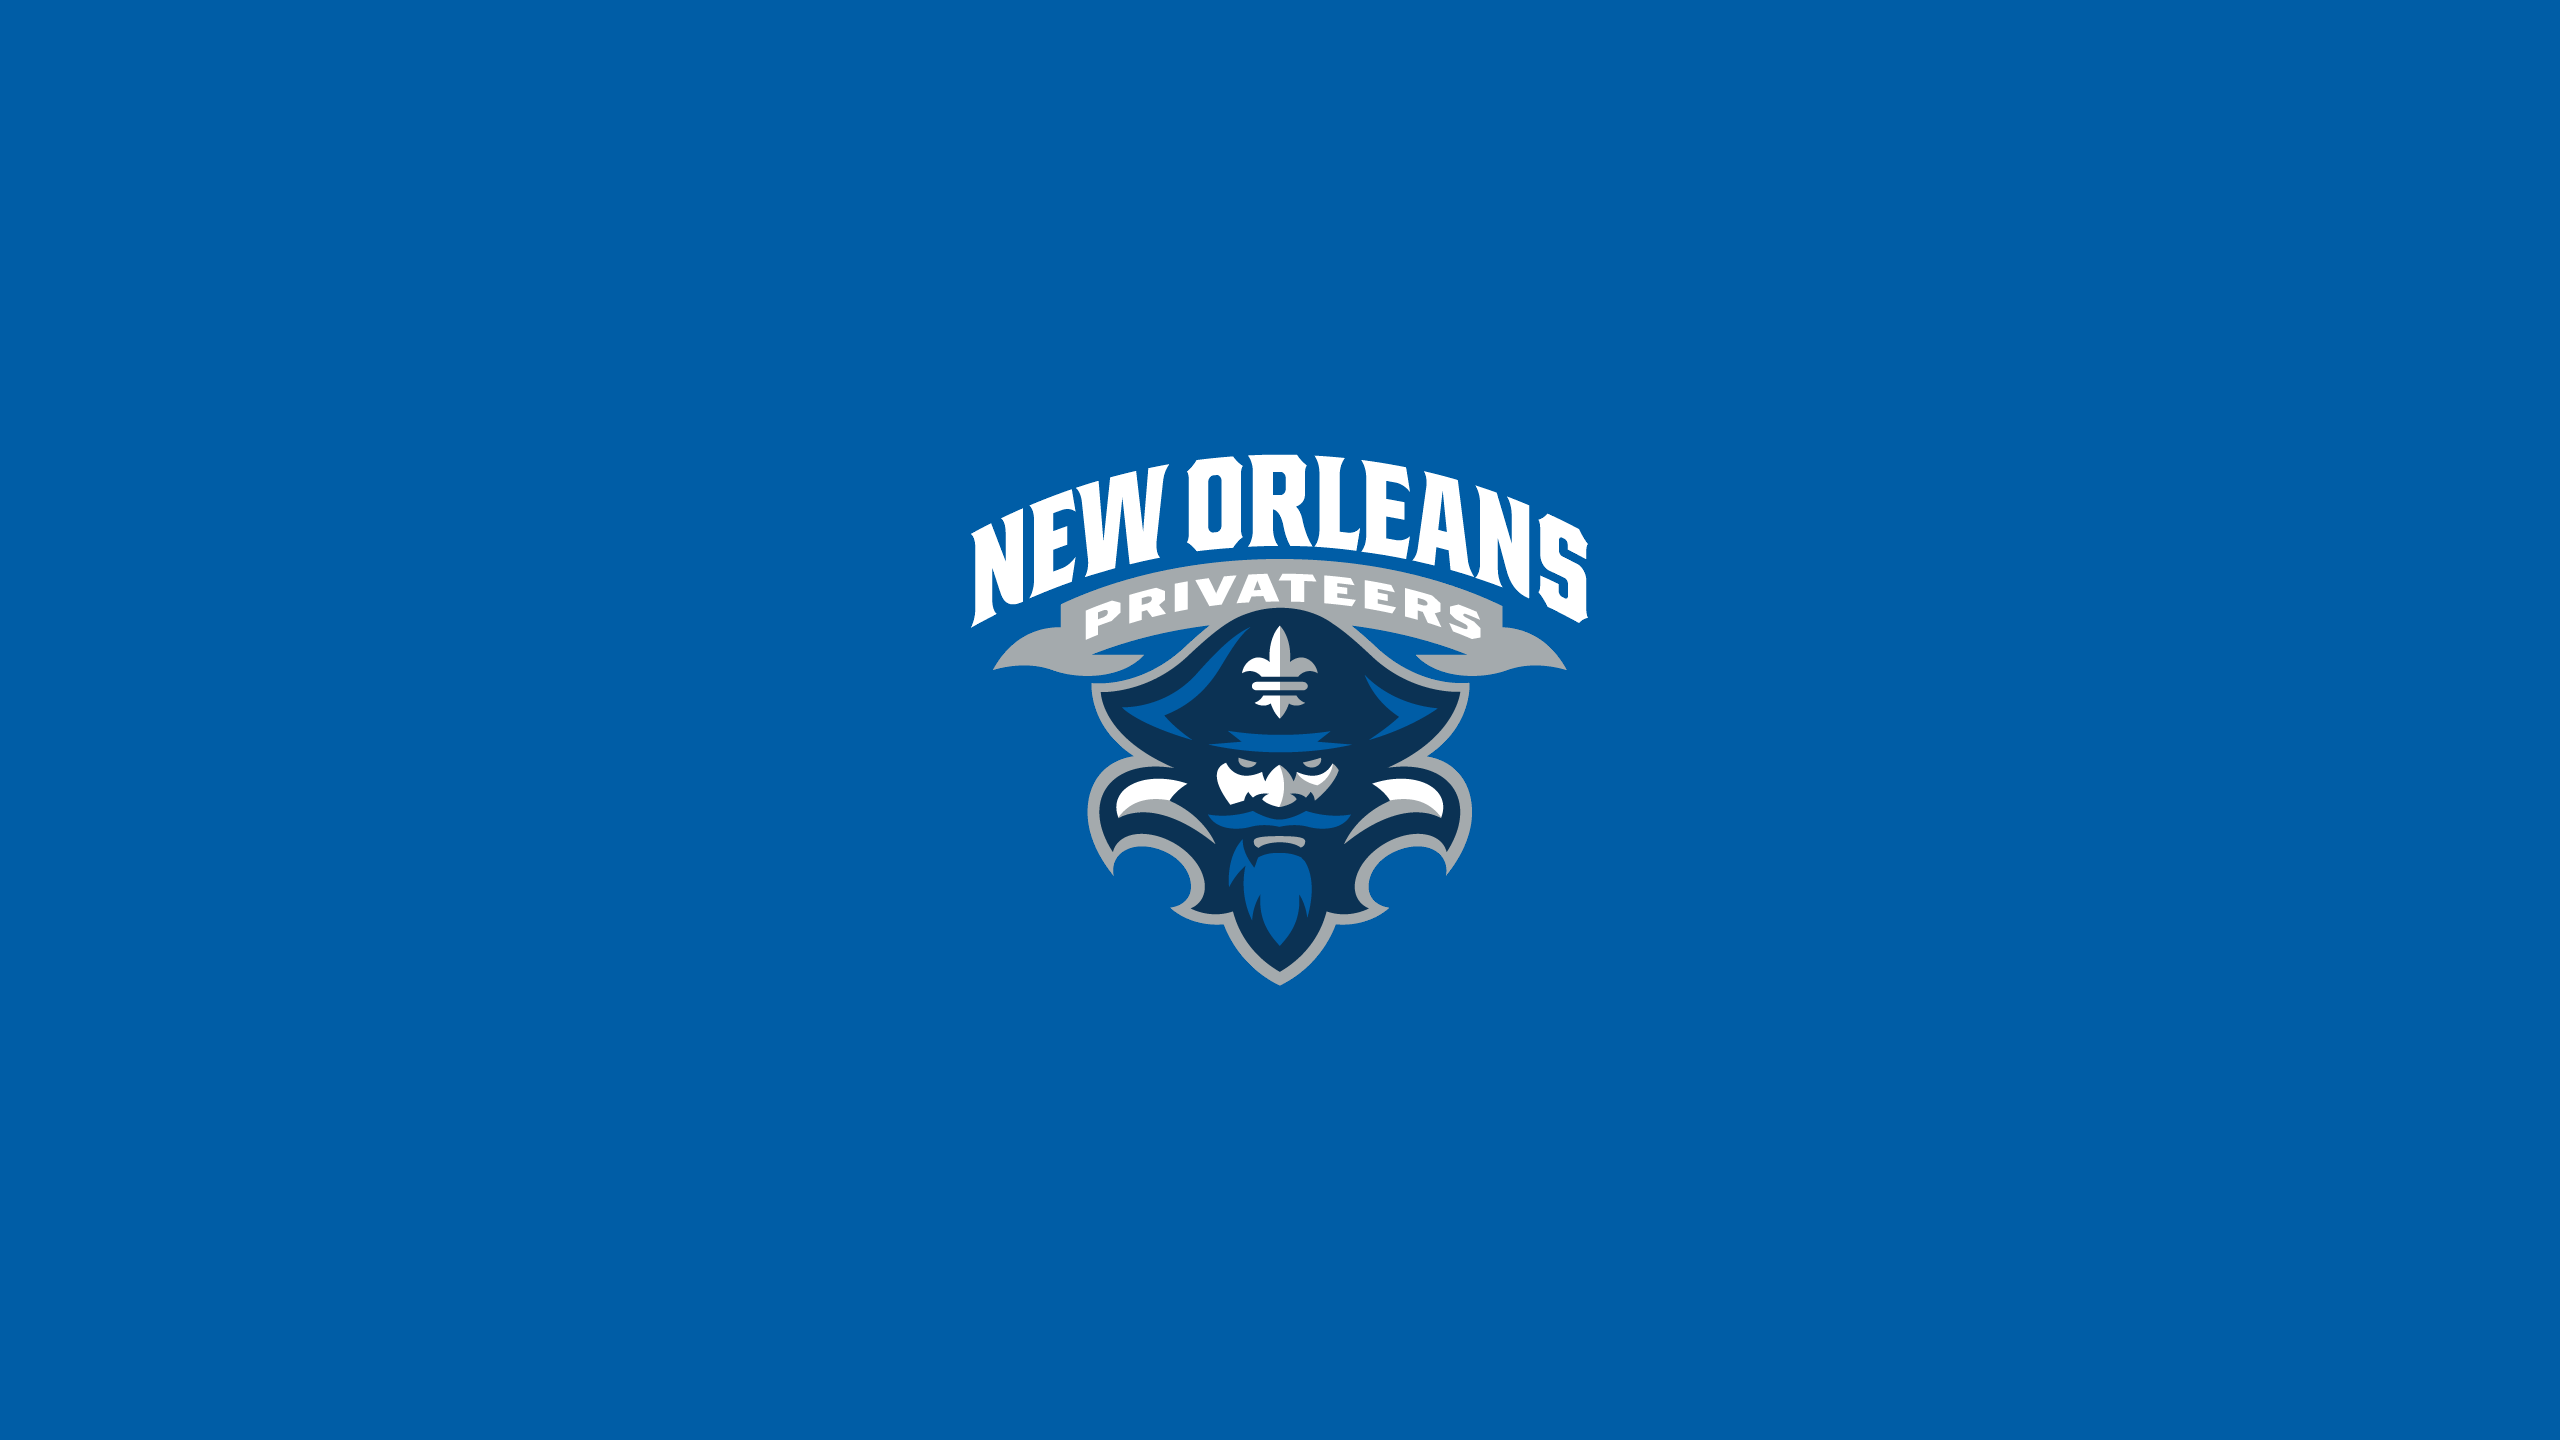 New Orleans Privateers Basketball - NCAAB - Square Bettor